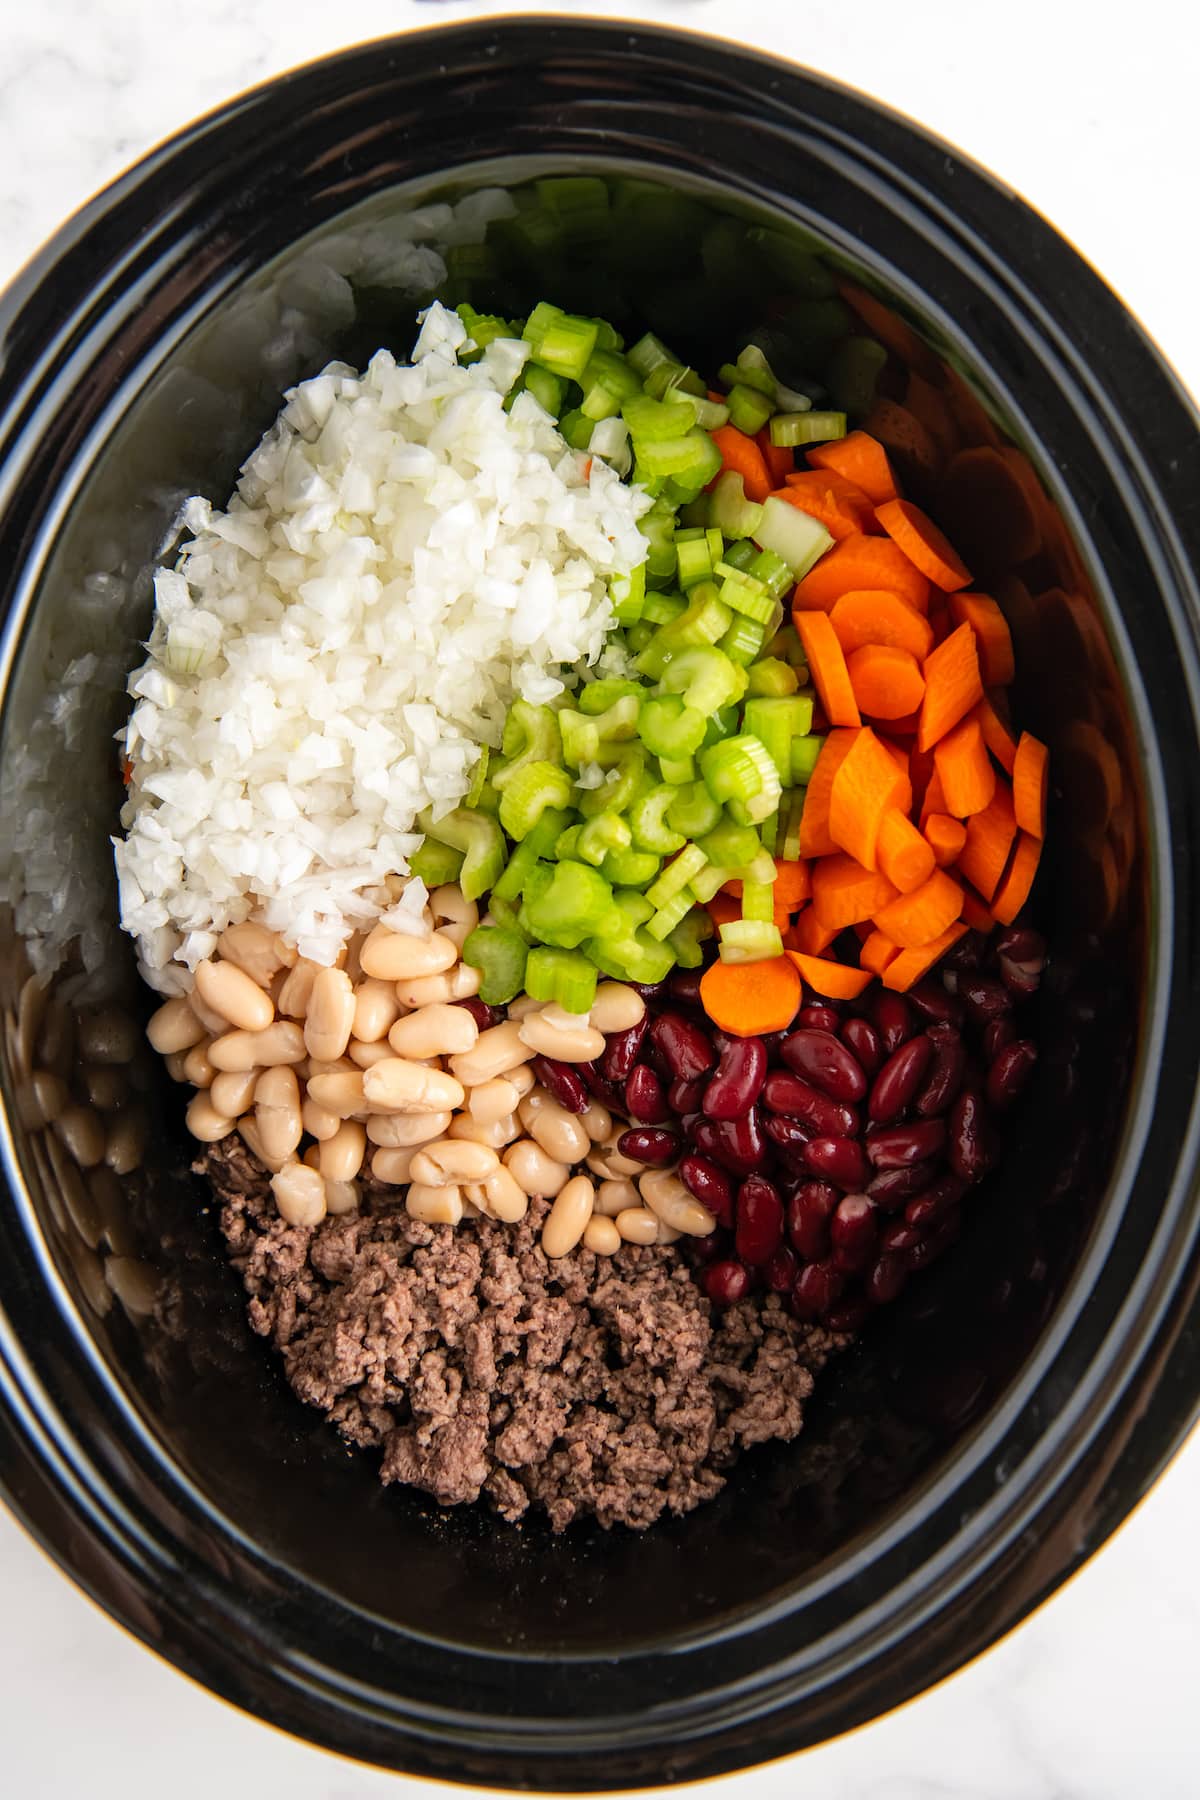 chopped vegetables, beans, and ground beef in a crockpot